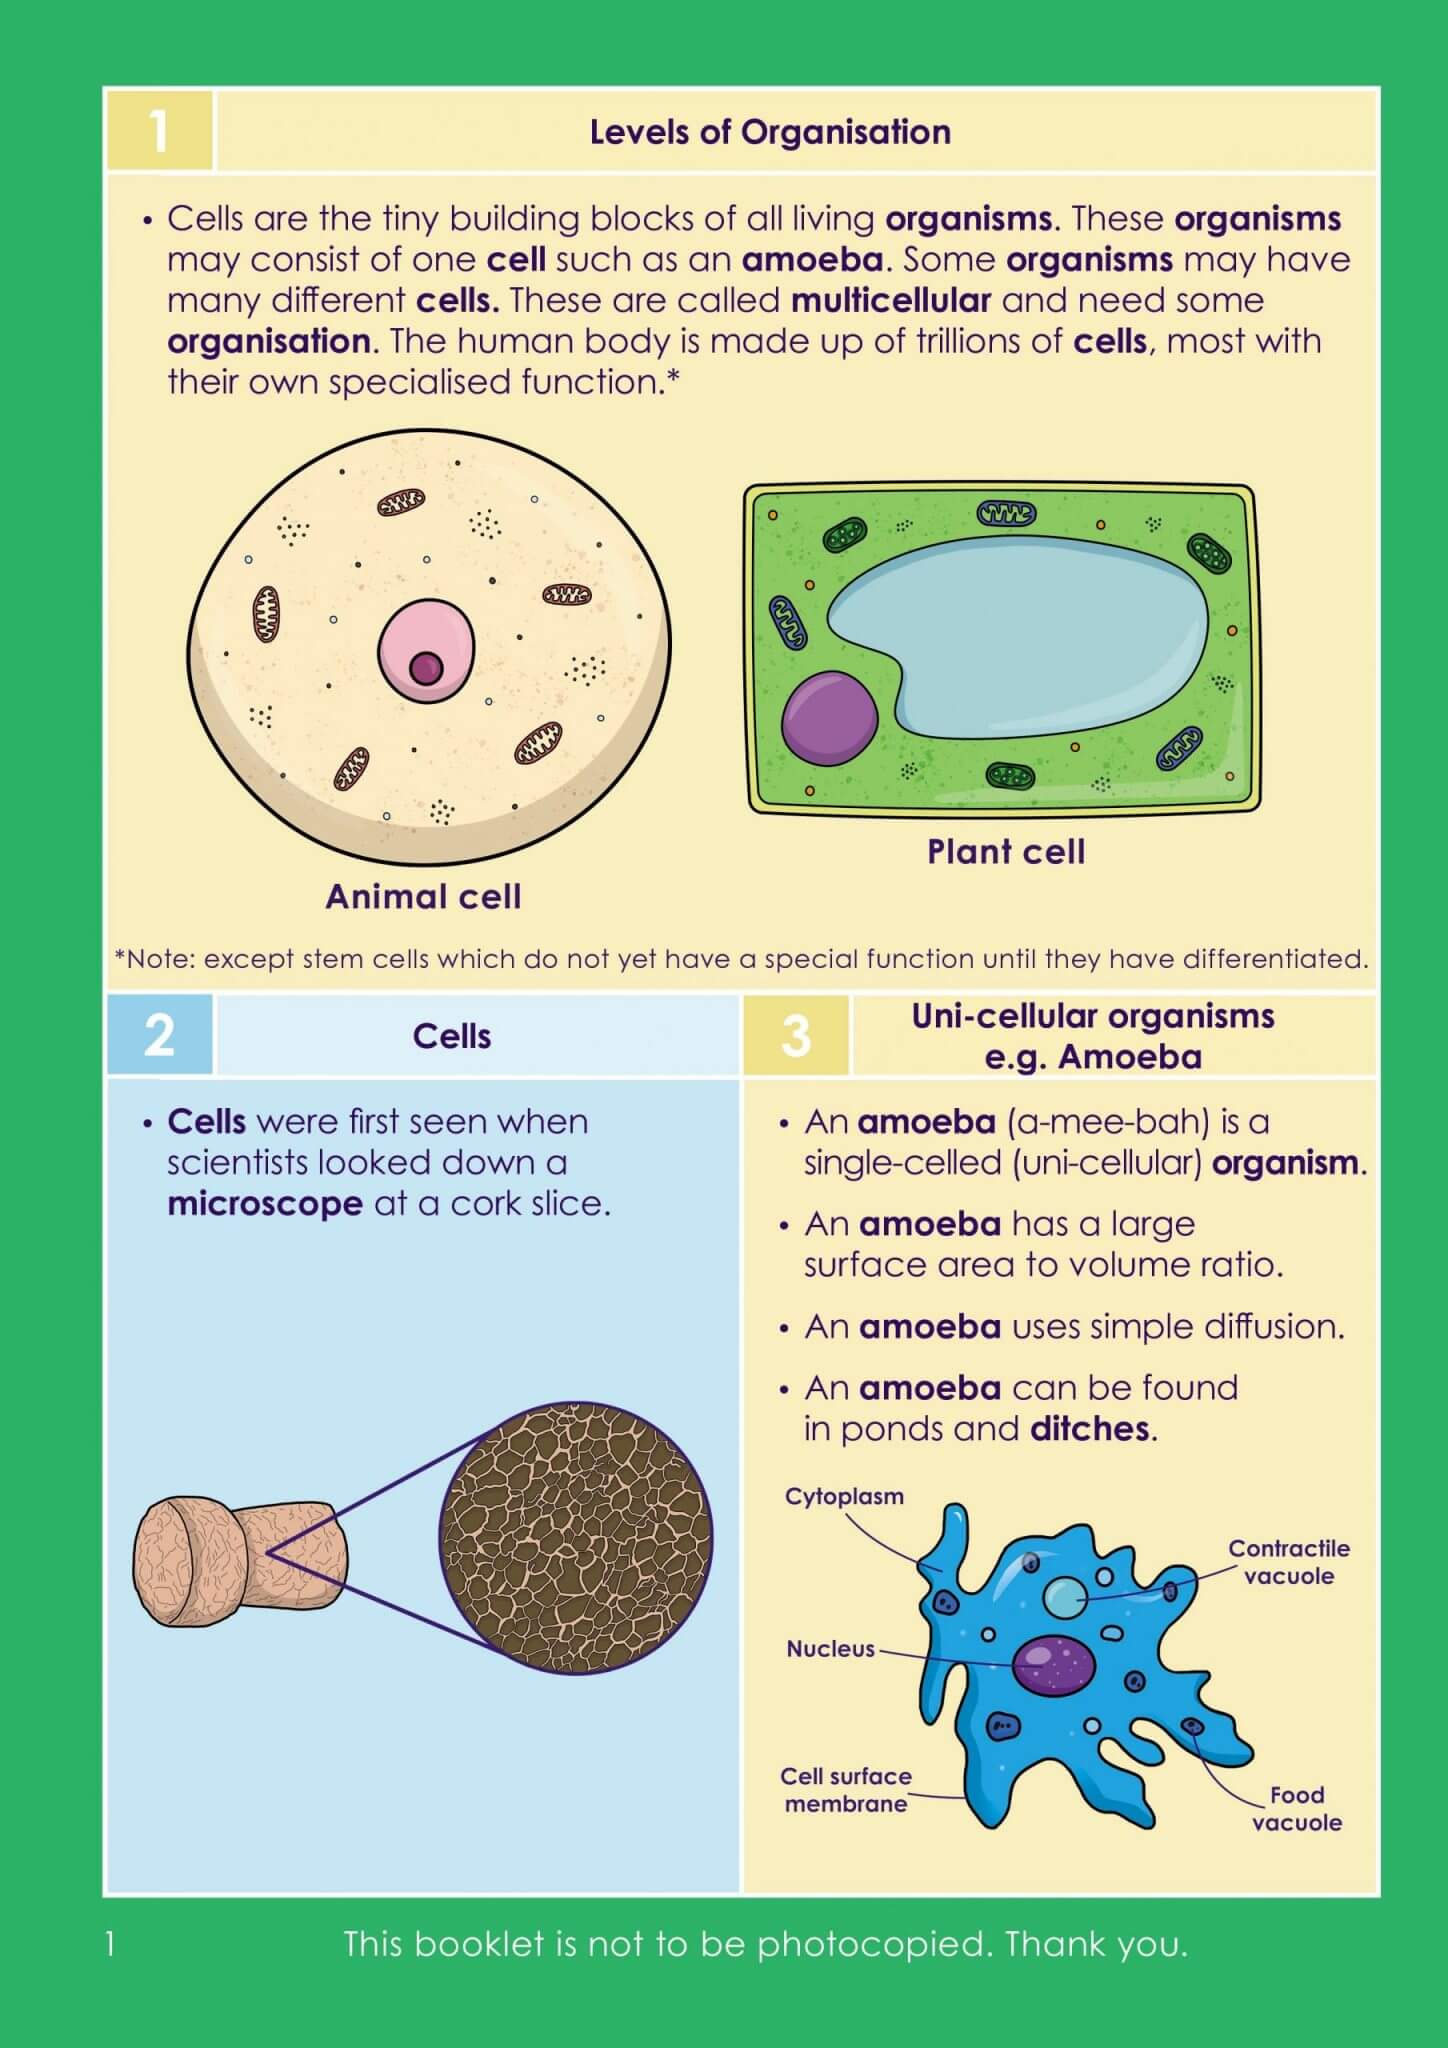 KS4/GCSE Biology | Cell Biology Pack | Resources For Dyslexics